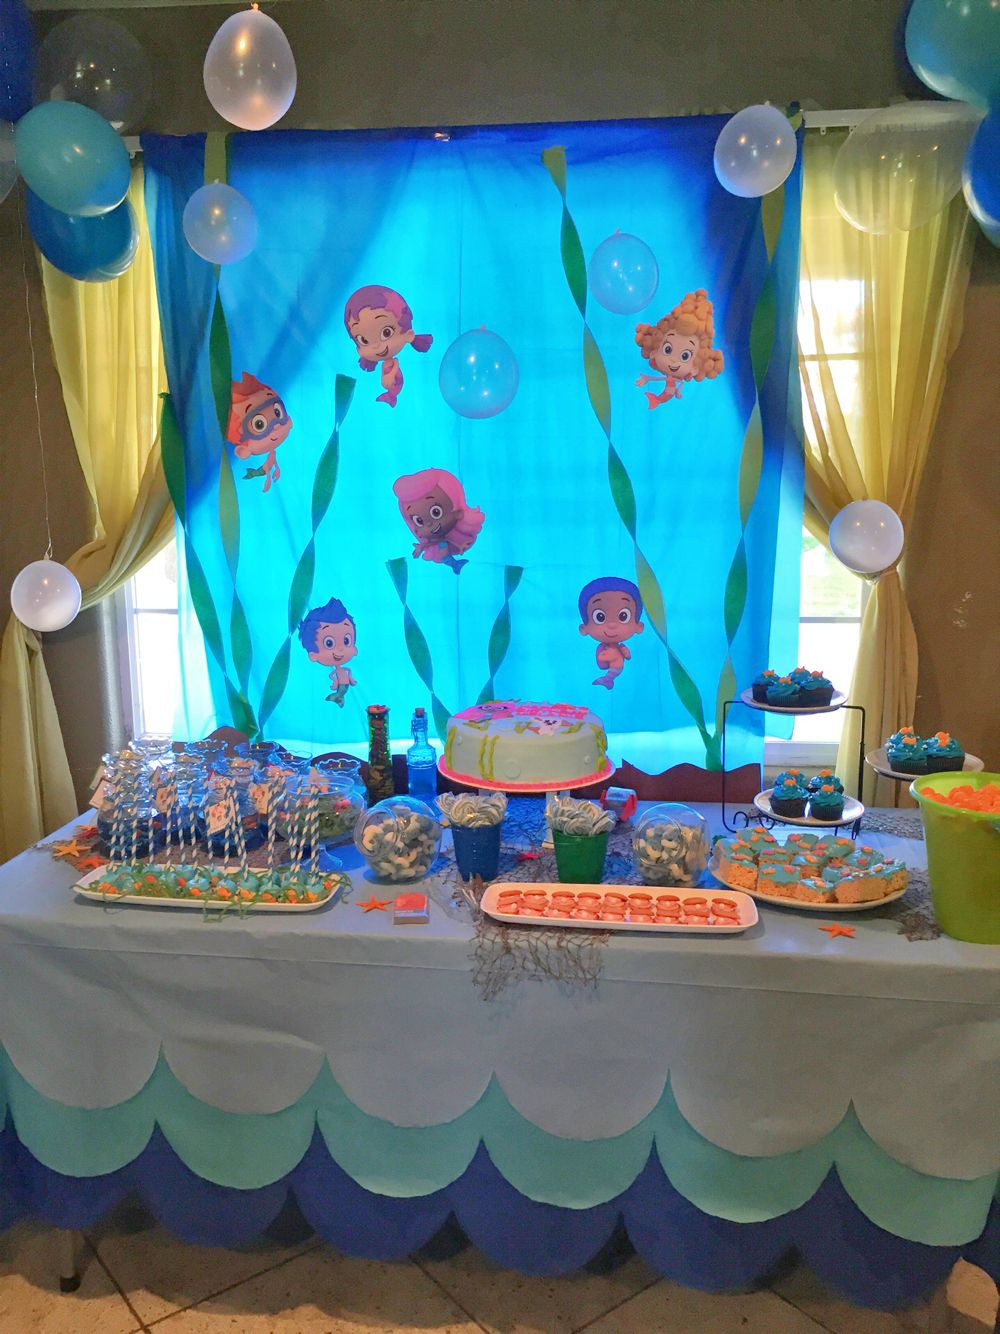 Bubble Guppies Birthday Party Decorations
 Bubble Guppies Birthday Party decorations